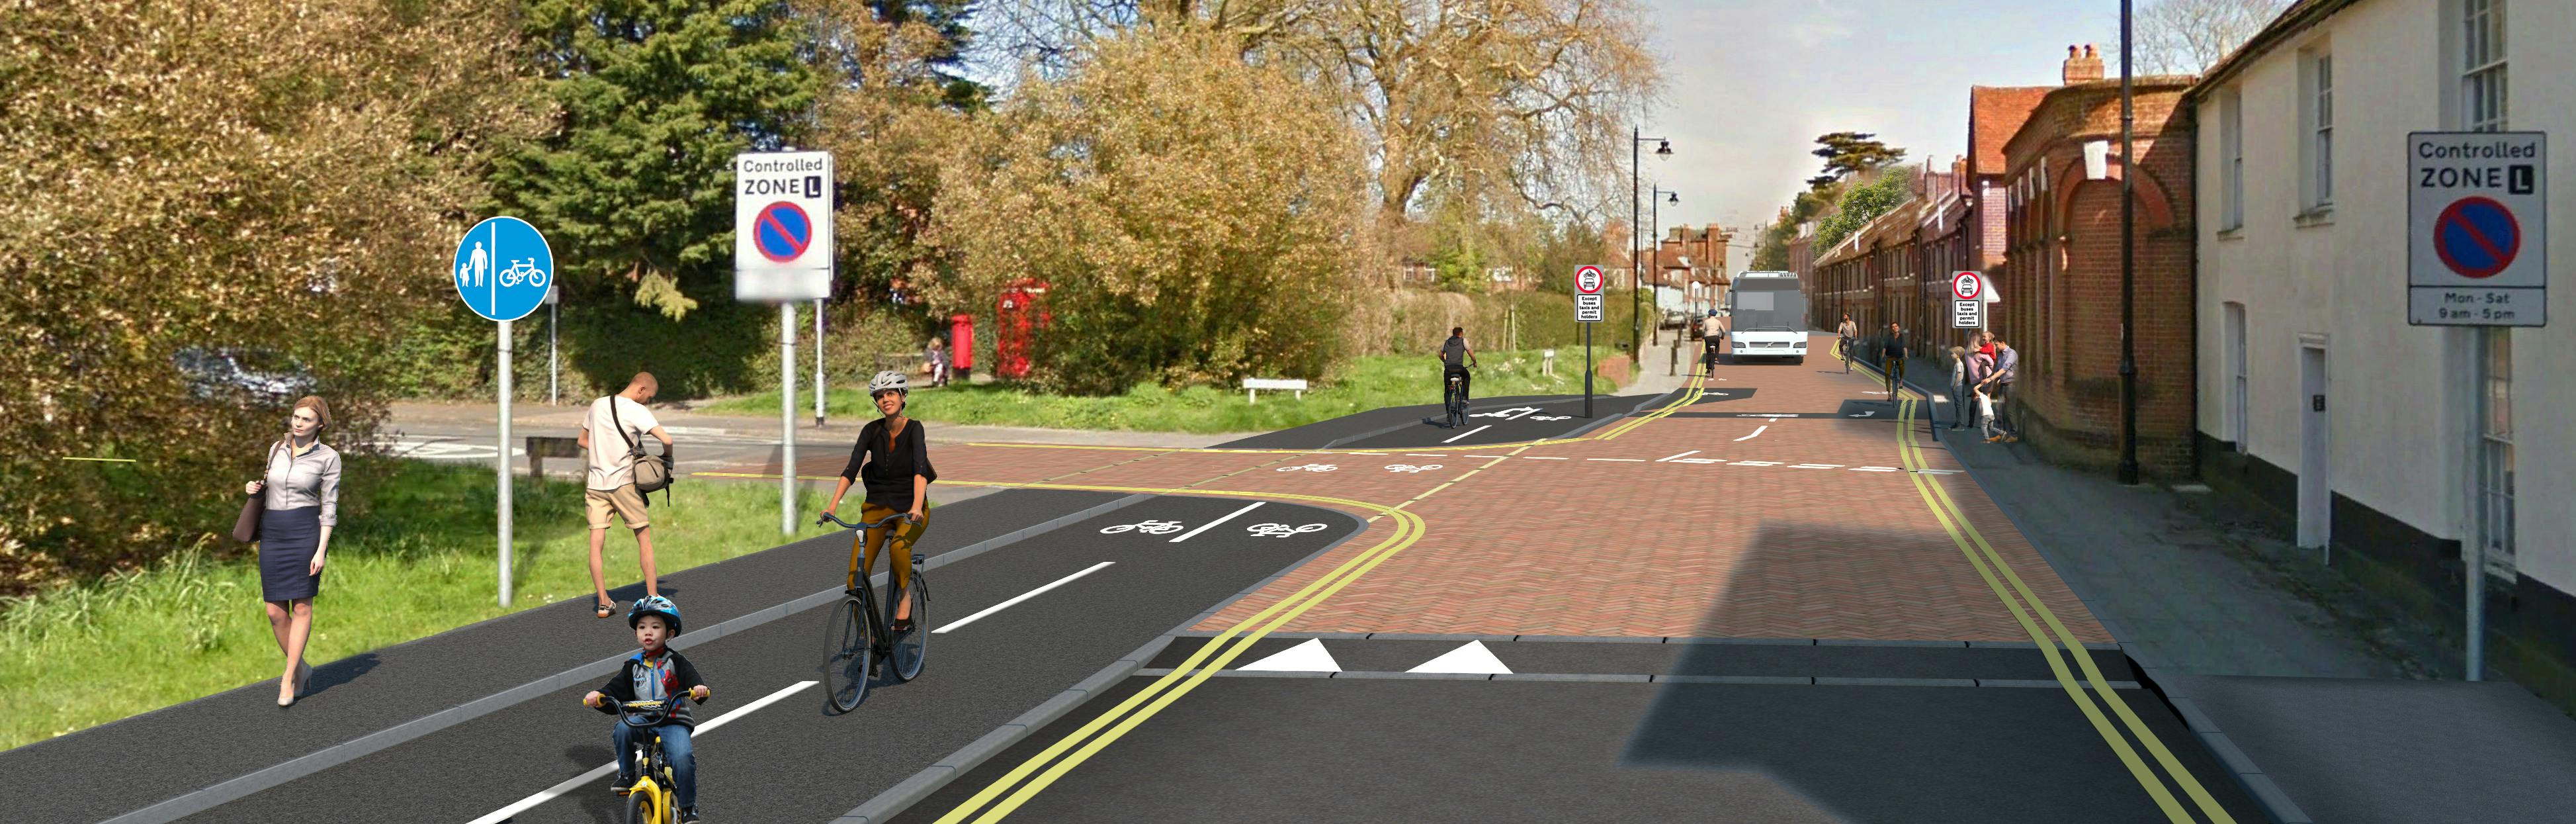 Proposed Westgate Road, showing the footpath, two way segregated cycle path and a contraflow bus lane